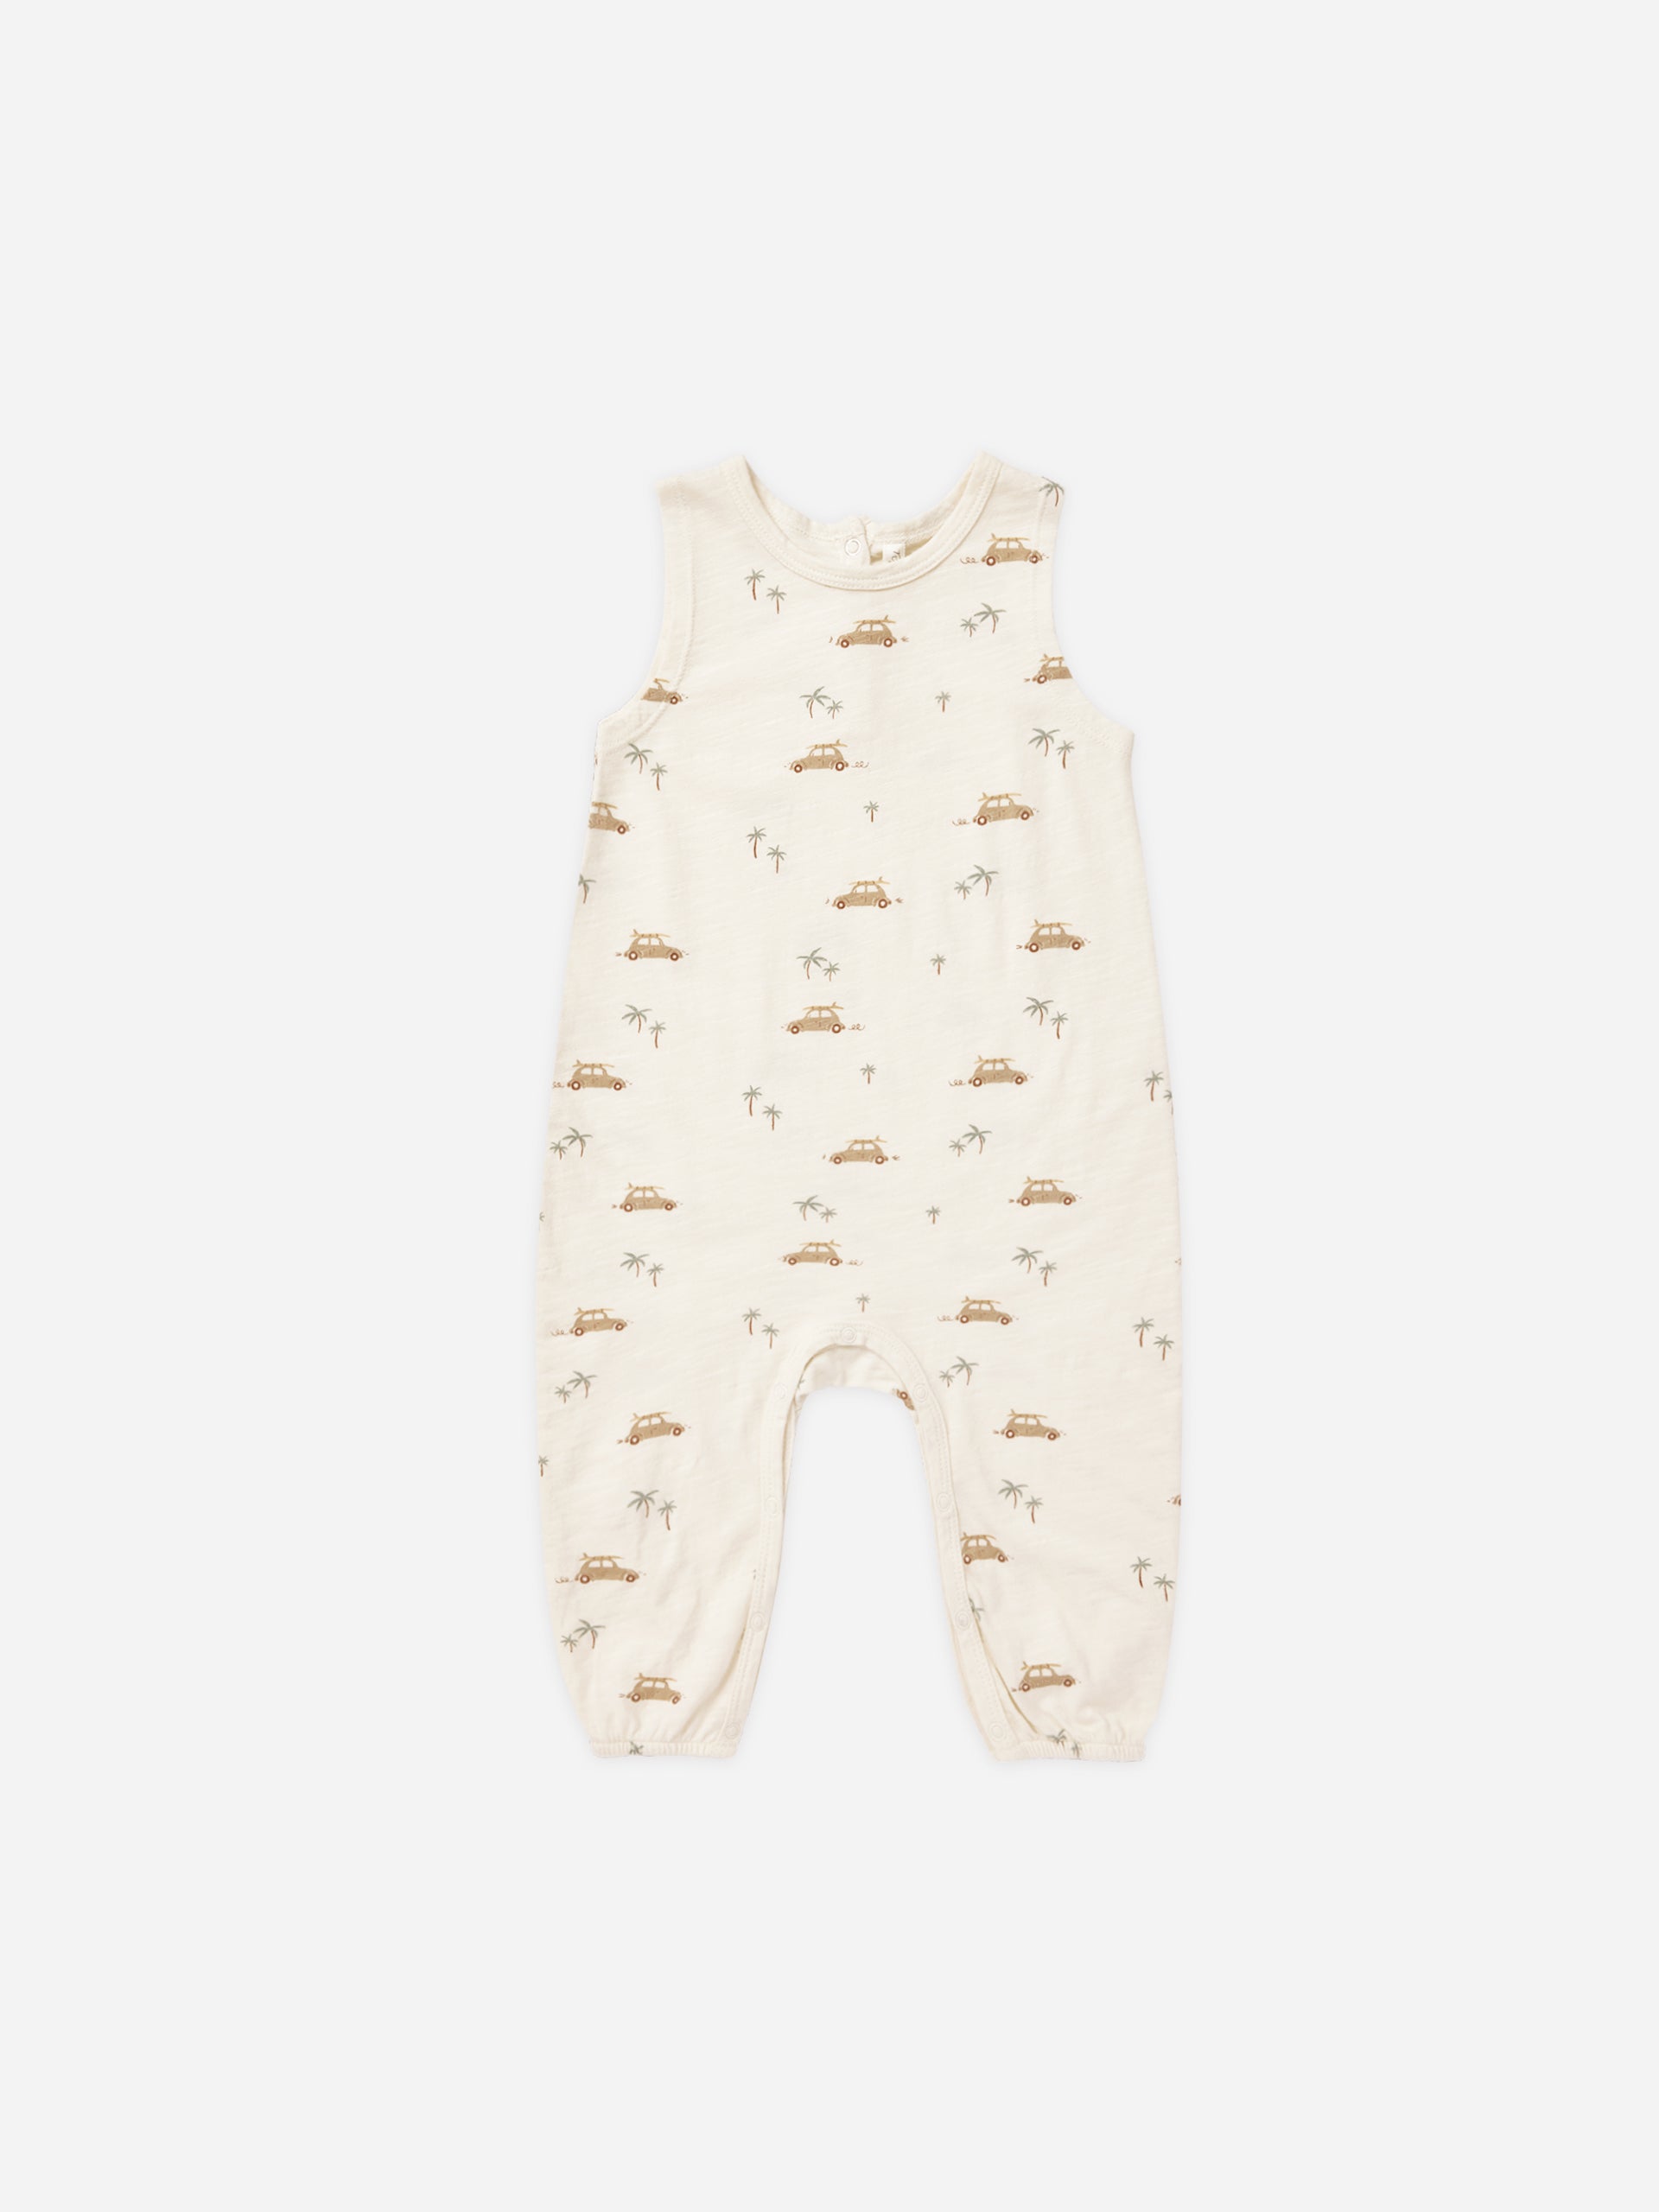 Mills Jumpsuit || Surf Buggy - Rylee + Cru | Kids Clothes | Trendy Baby Clothes | Modern Infant Outfits |